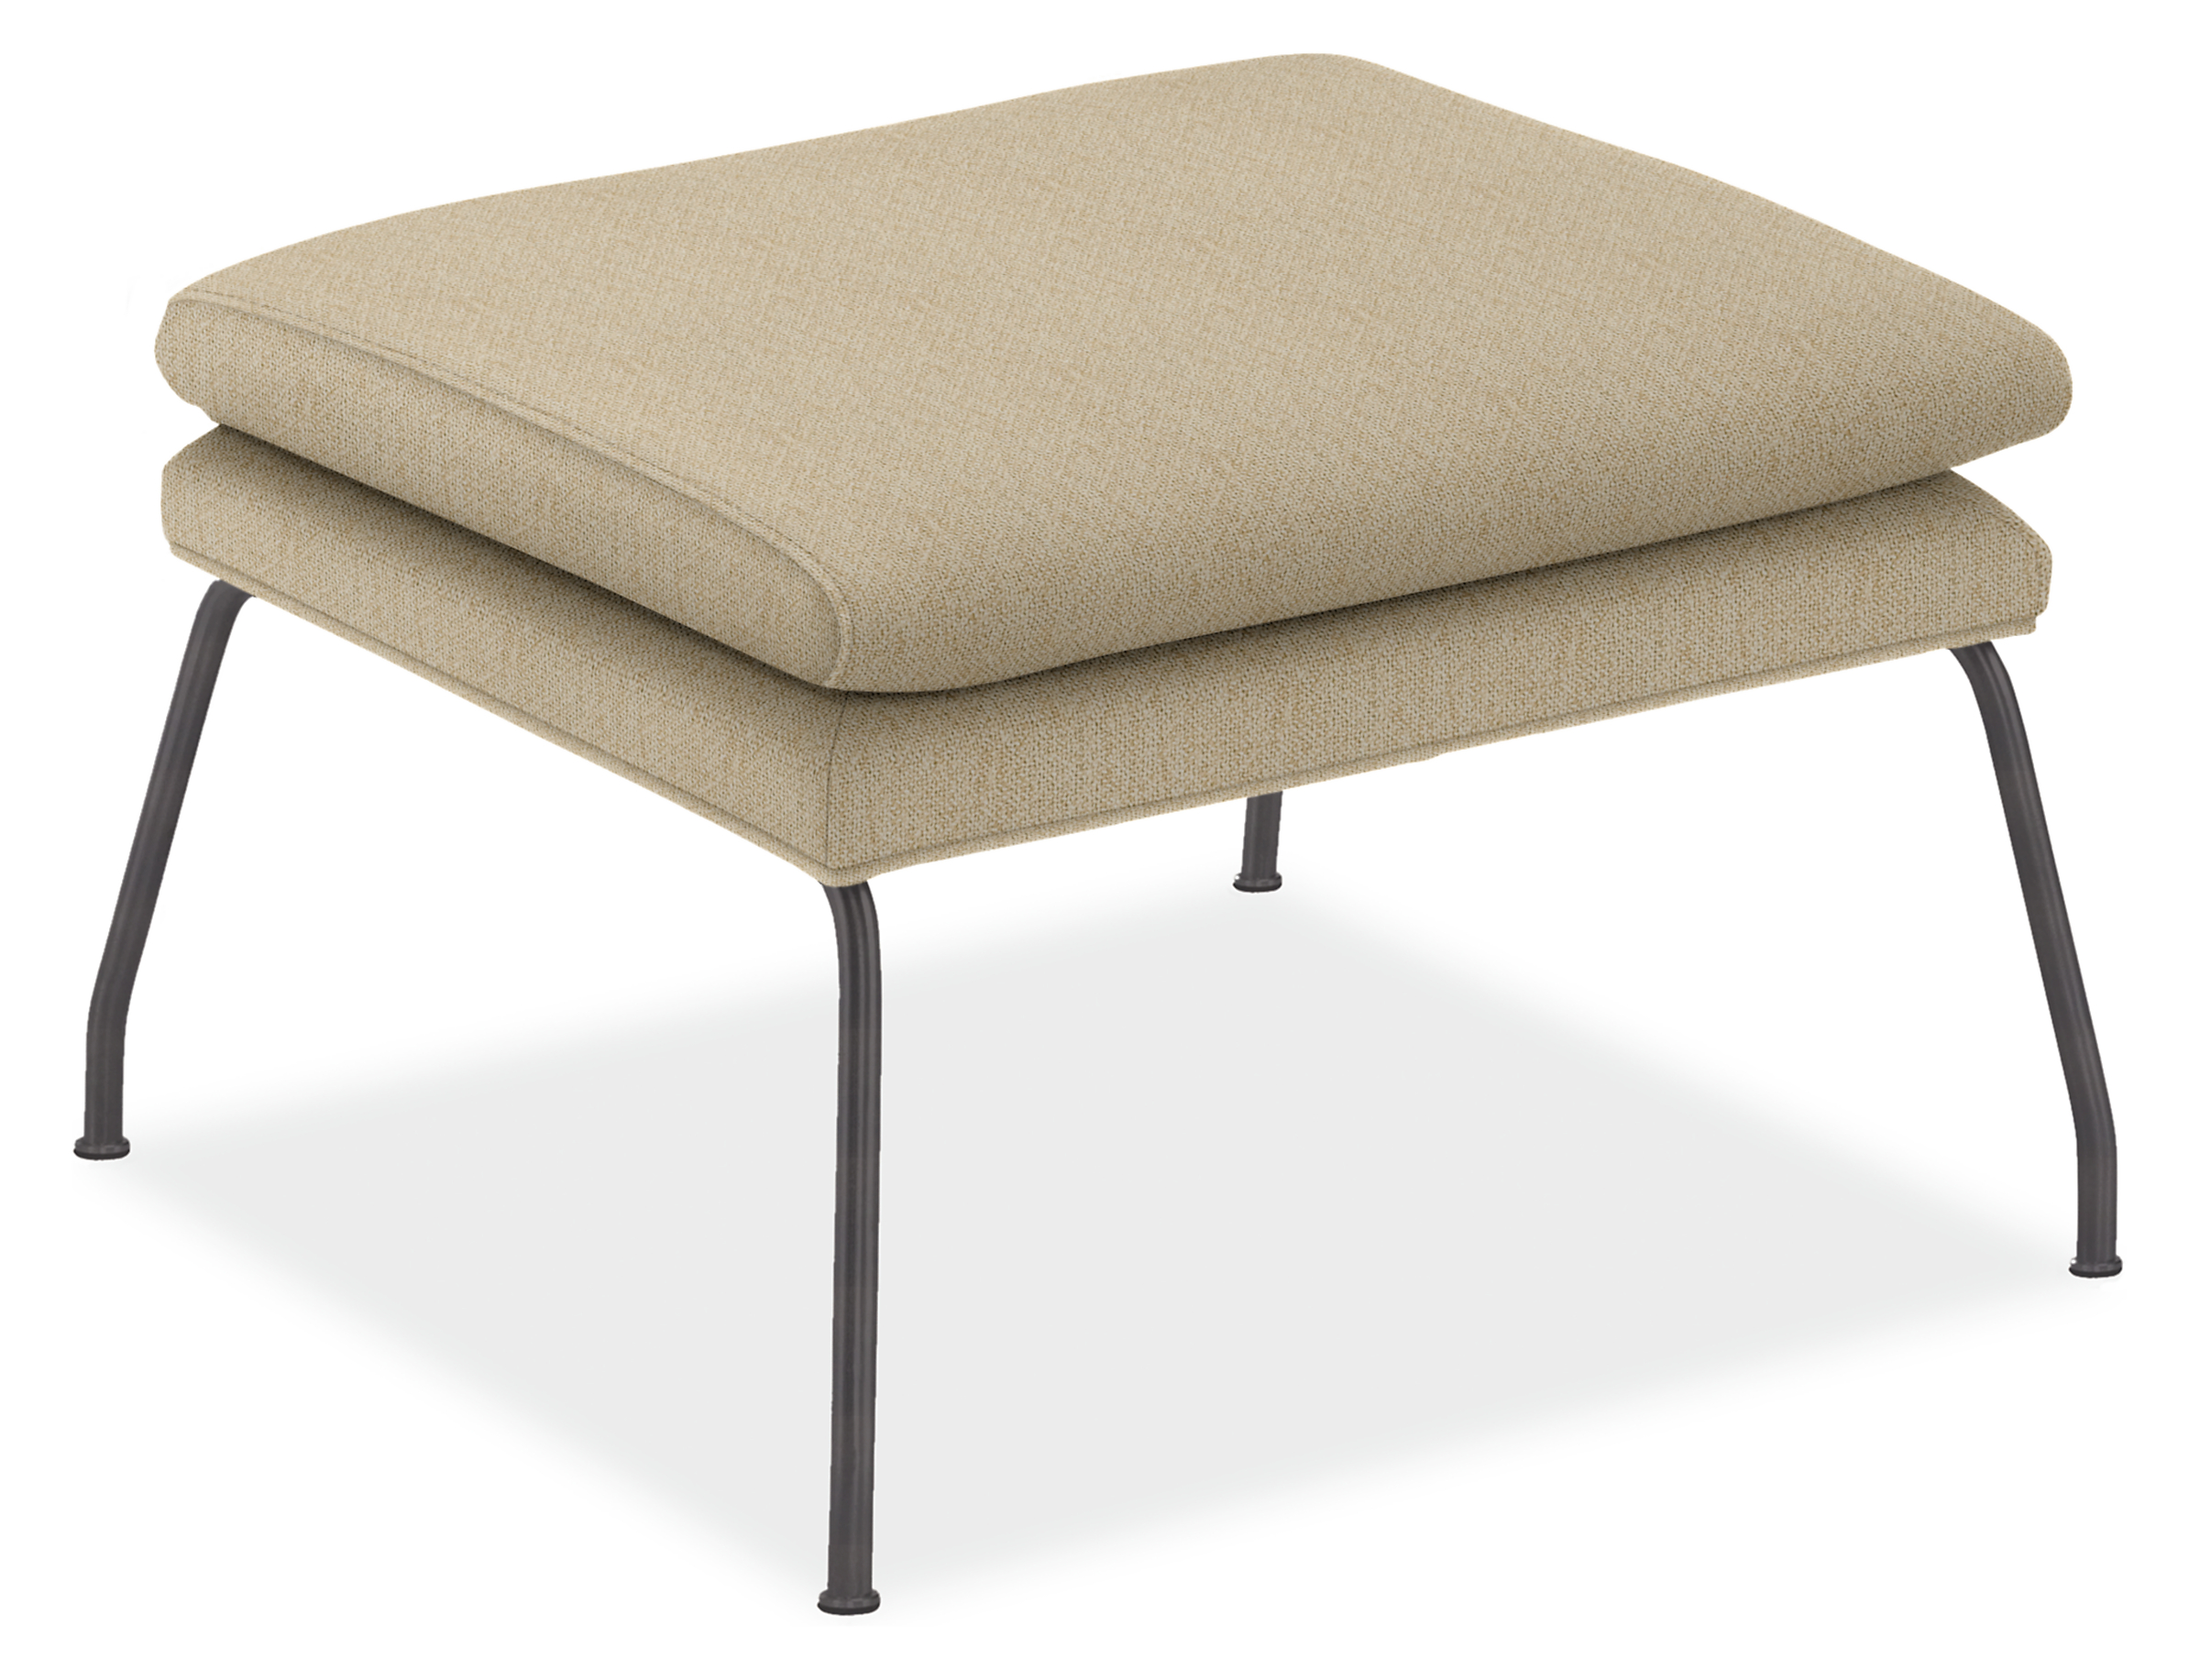 Aidan 24w 21d 15h Ottoman in Tatum Natural with Natural Steel